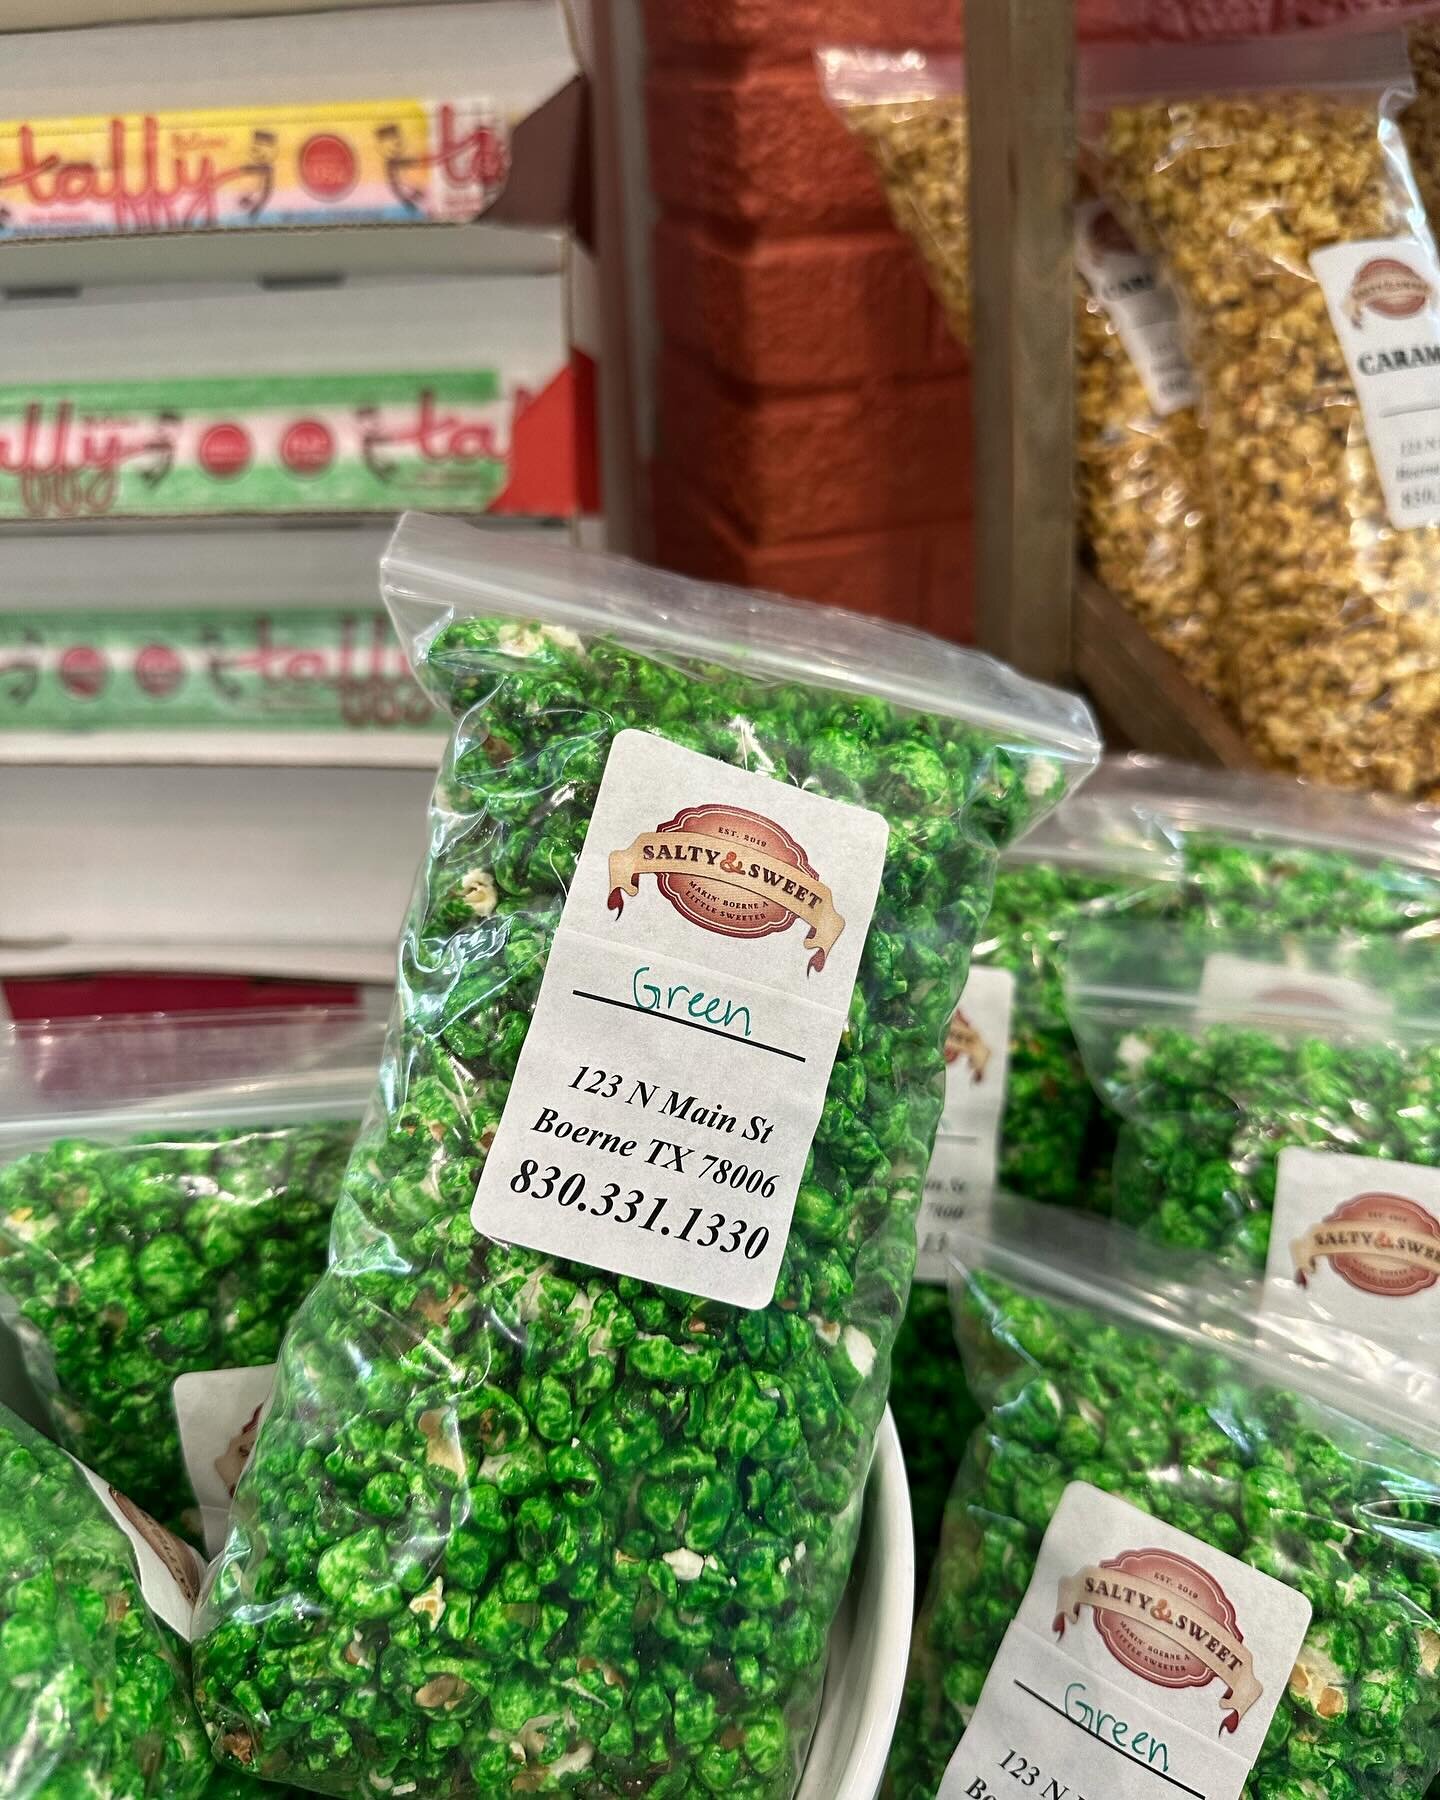 Happy St. Patty&rsquo;s Day!!🍀
We have green kettle favored popcorn that will be 1/2 off today! Stop in to get your delicious popcorn!🍀
#boerne #salty #sweet #popcorn #St.Patrick